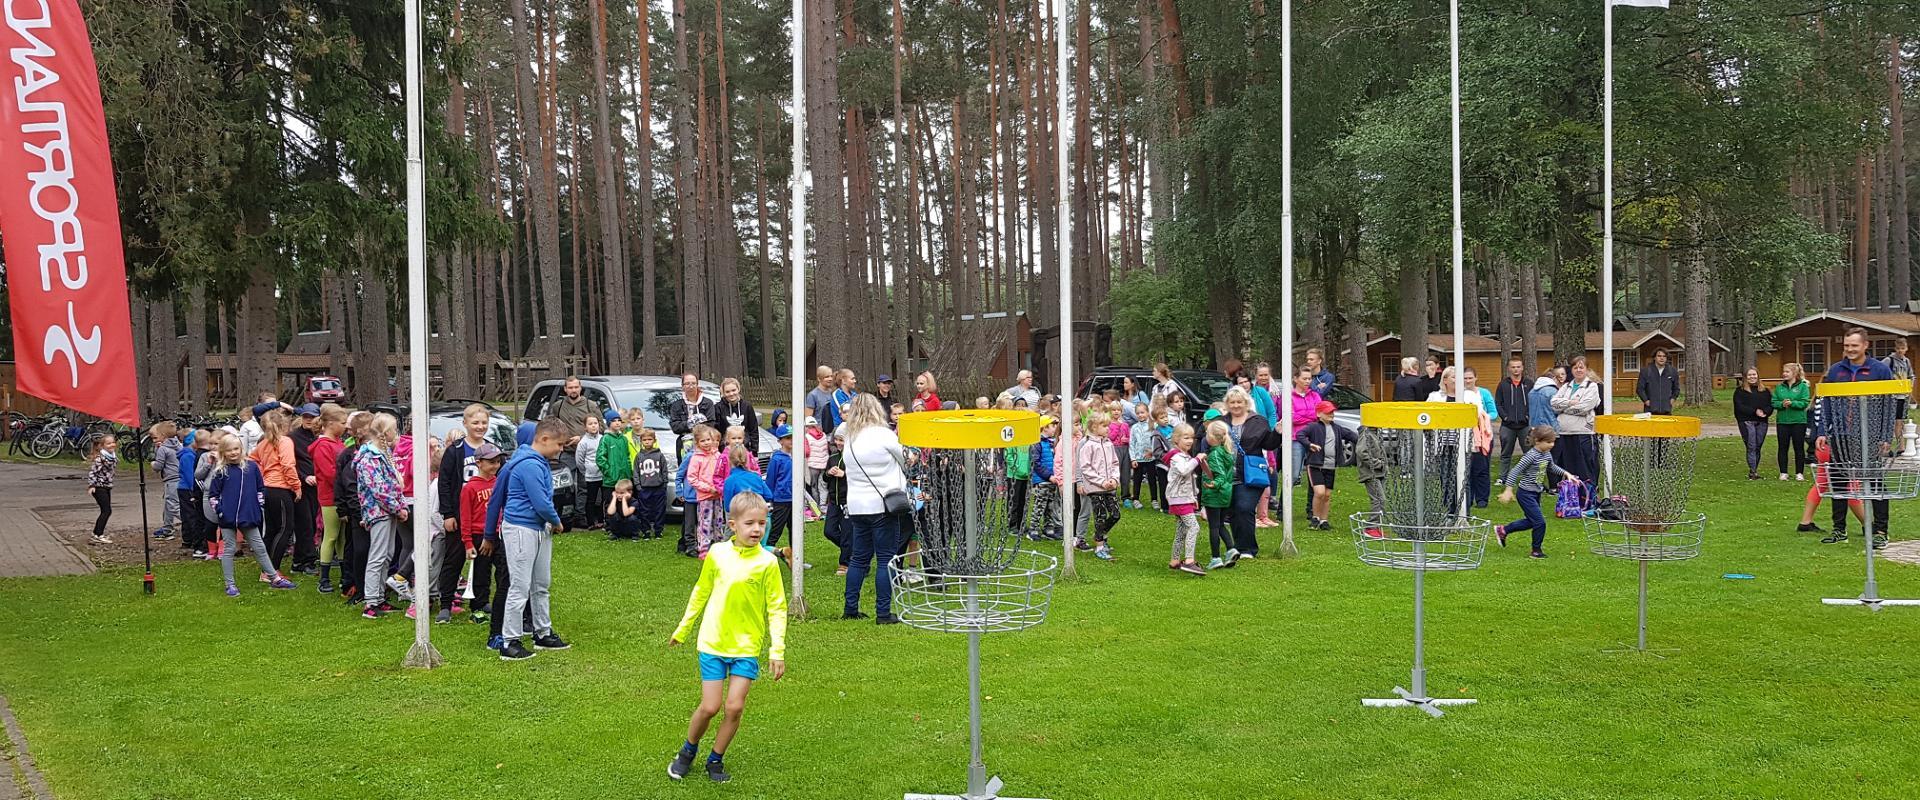 Disc golf park at Tartu County Recreational Sports Centre, lessons for school